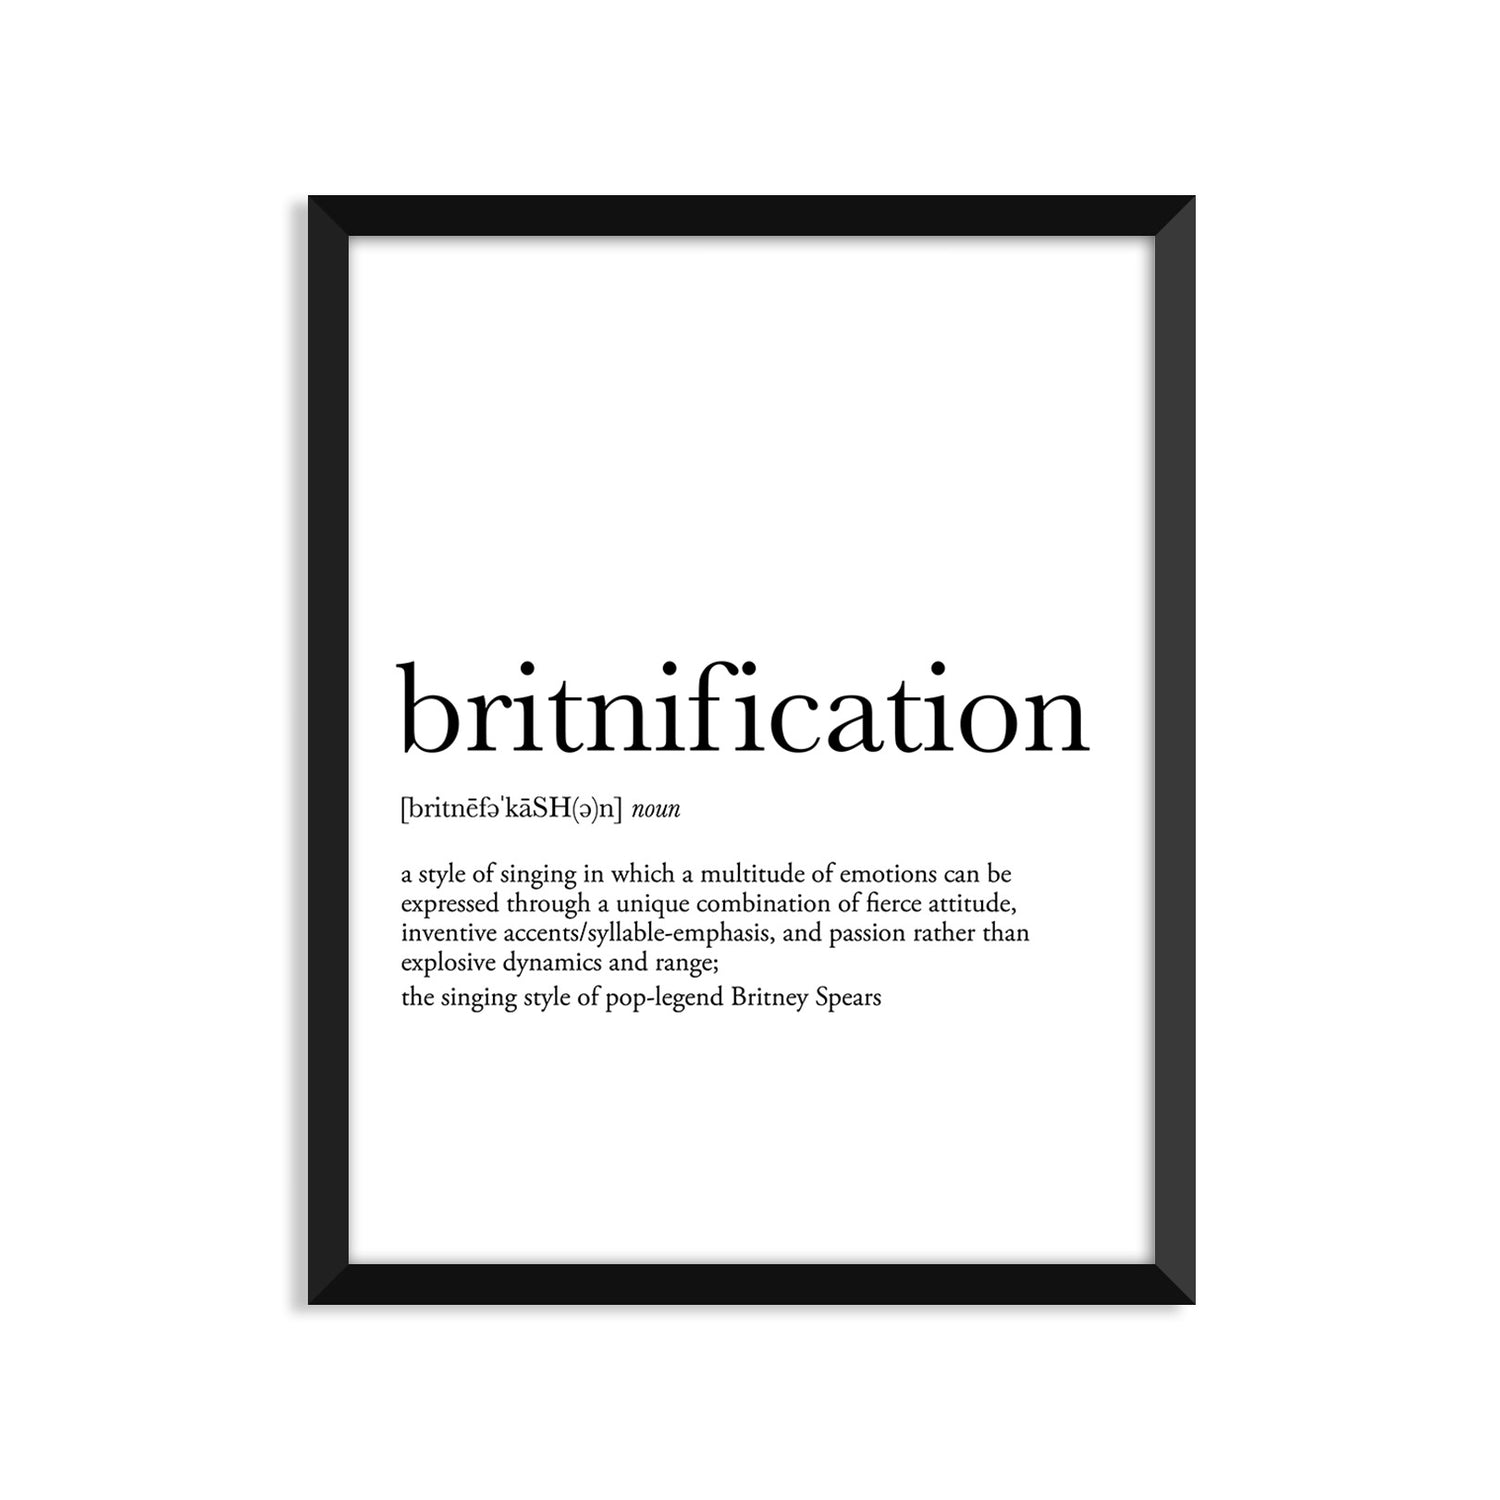 Britnification definition art print or greeting card